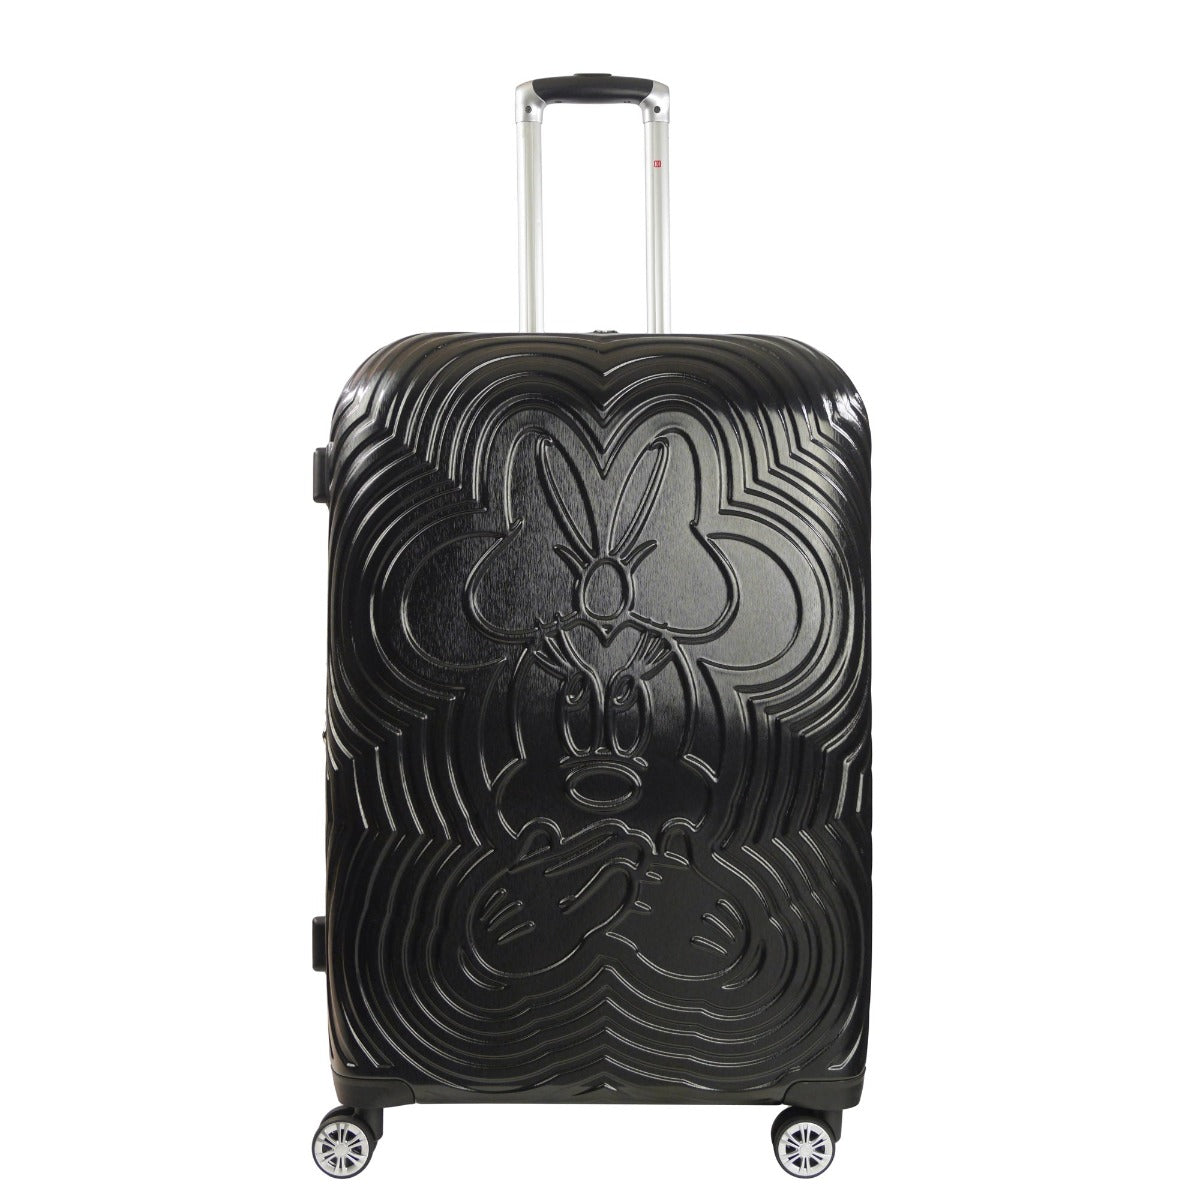 Disney Ful Playful Minnie Mouse 30.5" carry on expandable spinner suitcase hard sided Ful luggage black